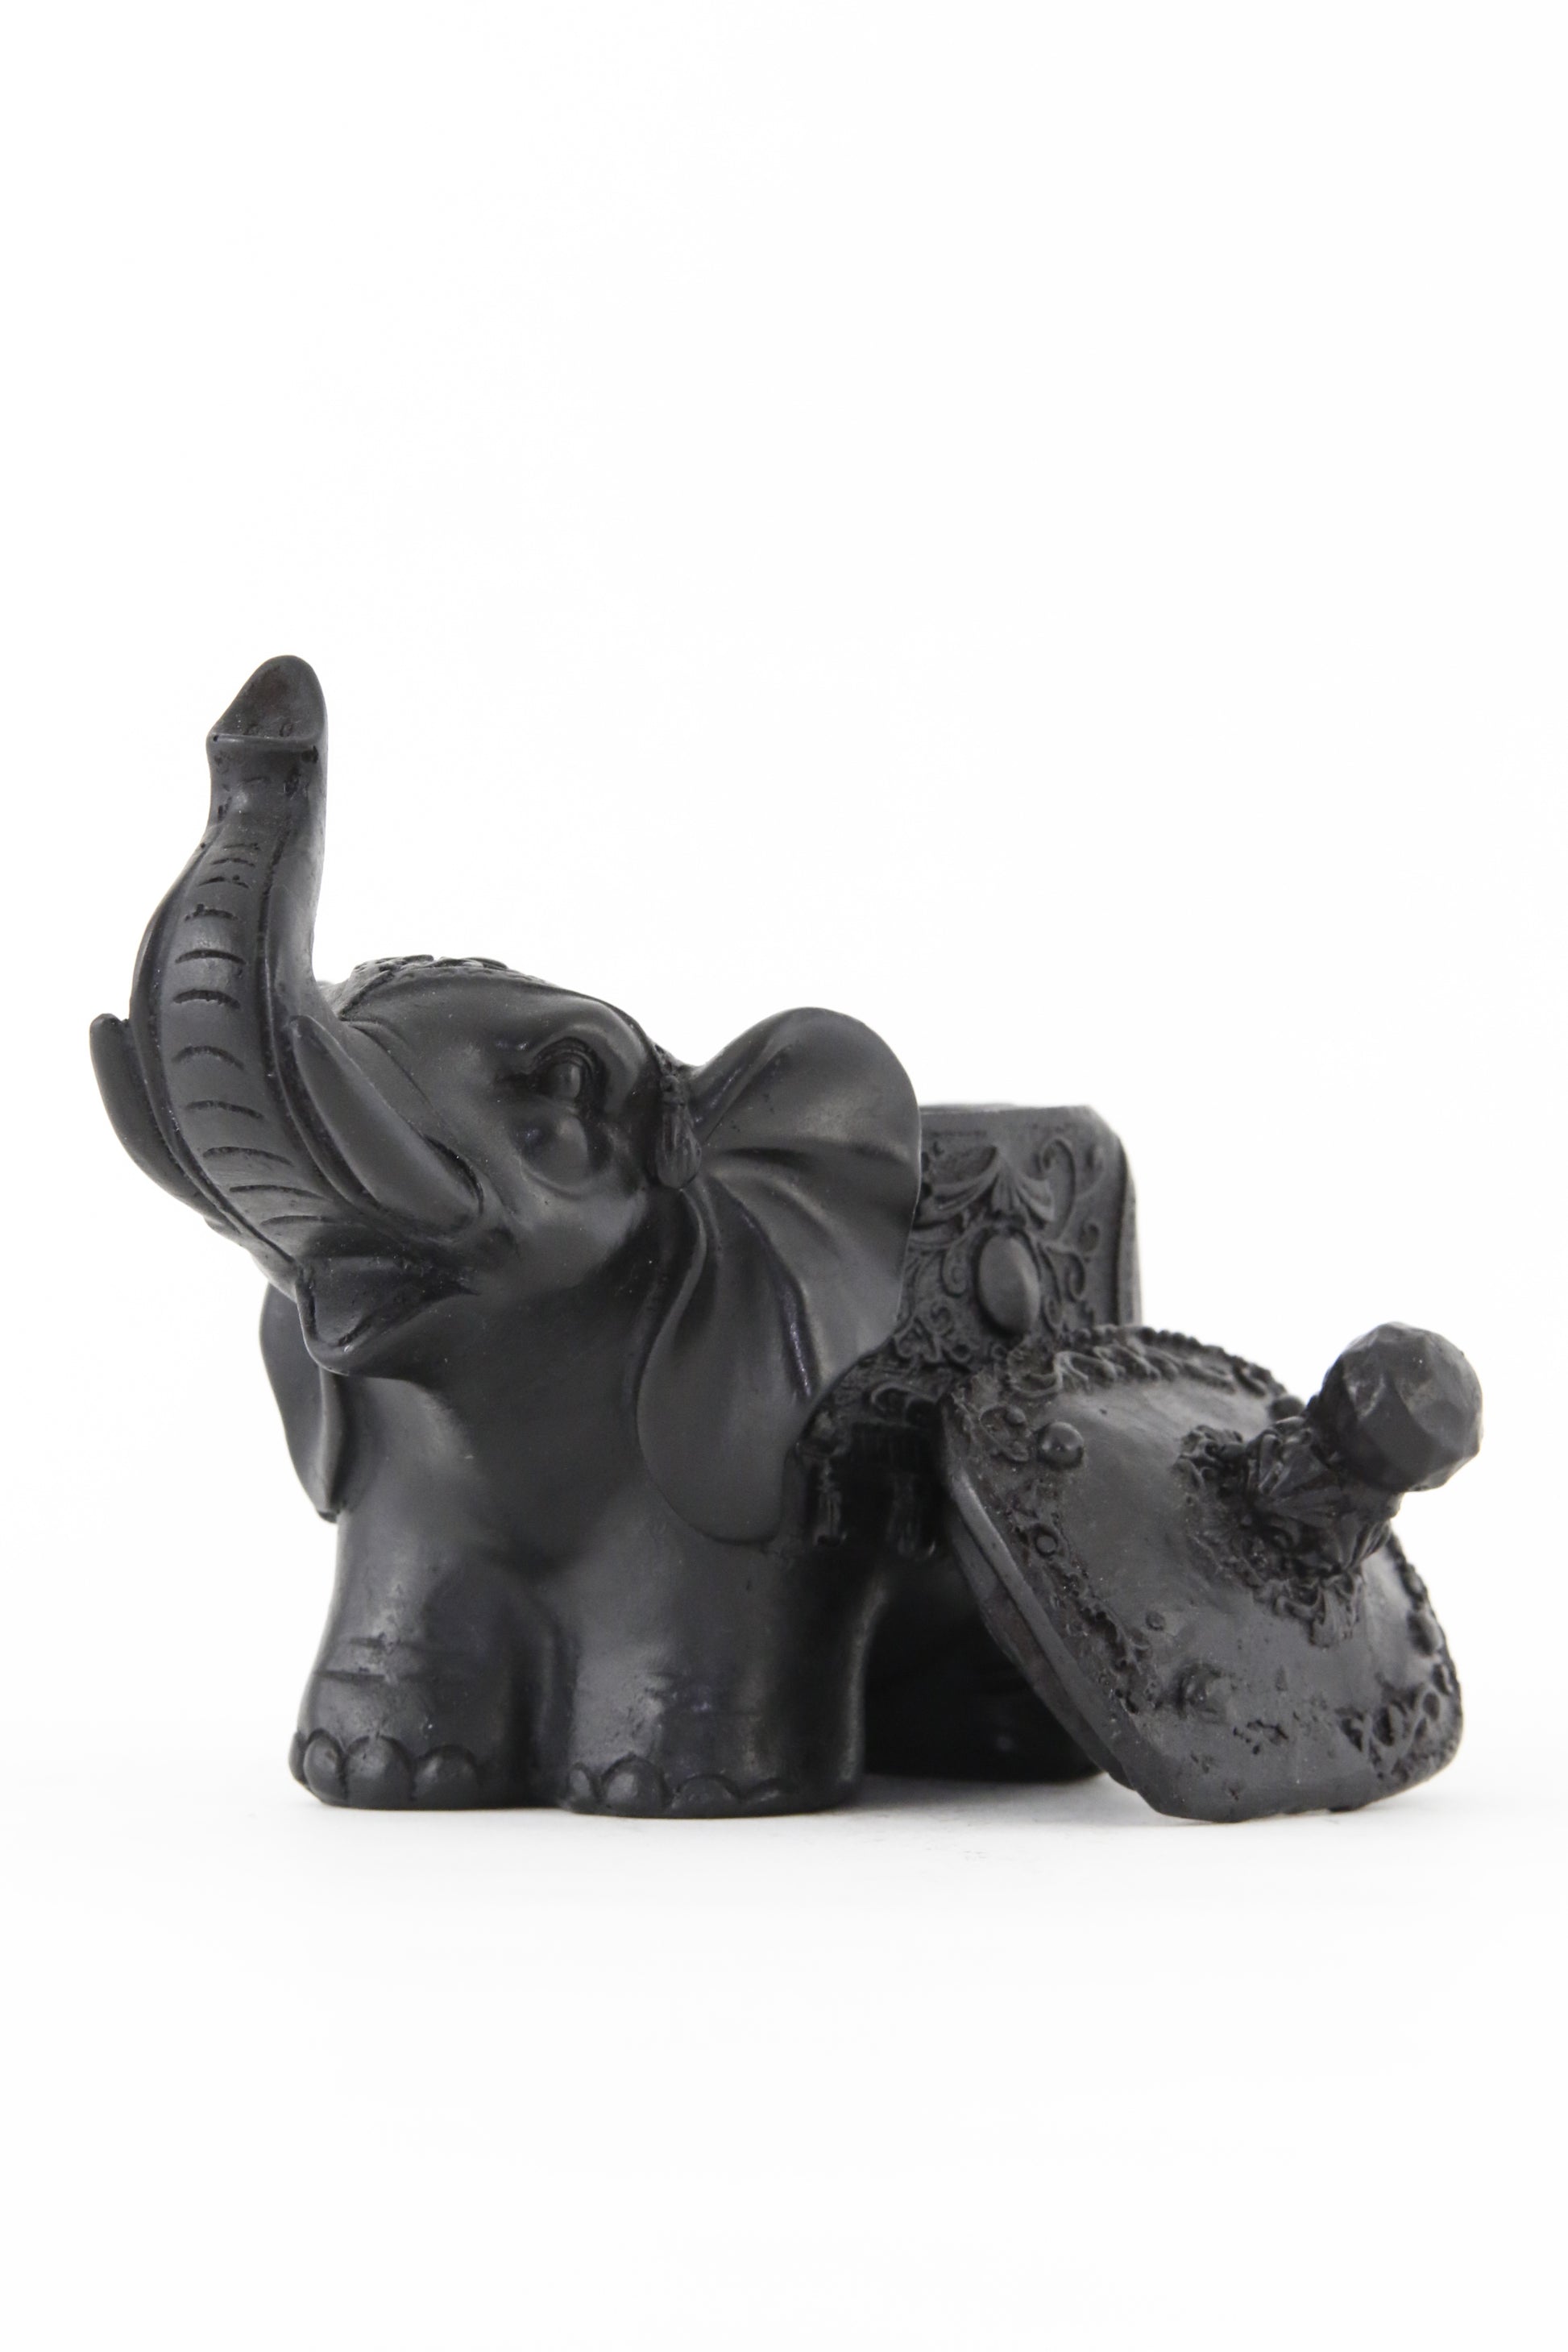 ELEPHANT BOX STATUE RECTANGLE COVER OFF DARK SIDE VIEW